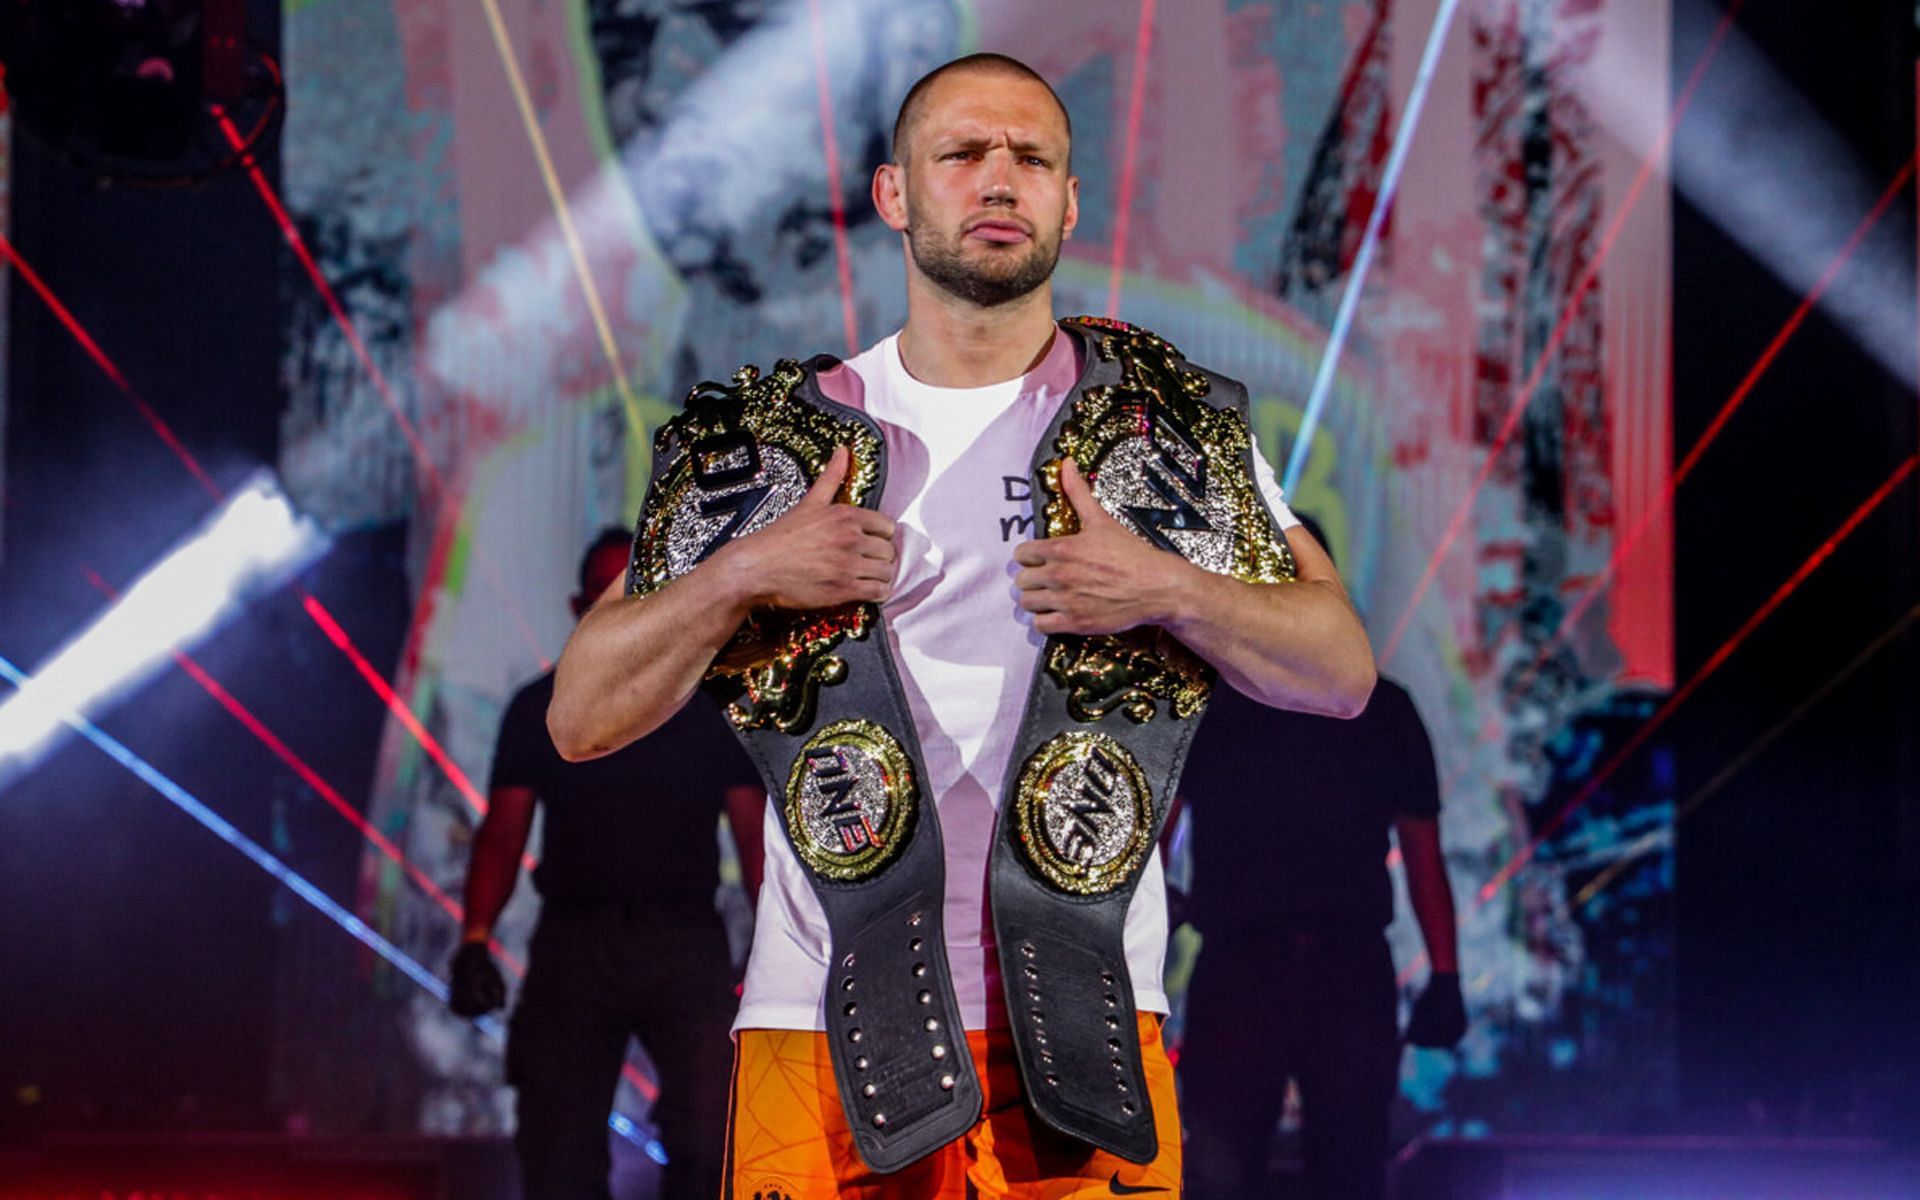 Reinier de Ridder will put one of his two belts on the line at ONE 159. | [Photo: ONE Championship]